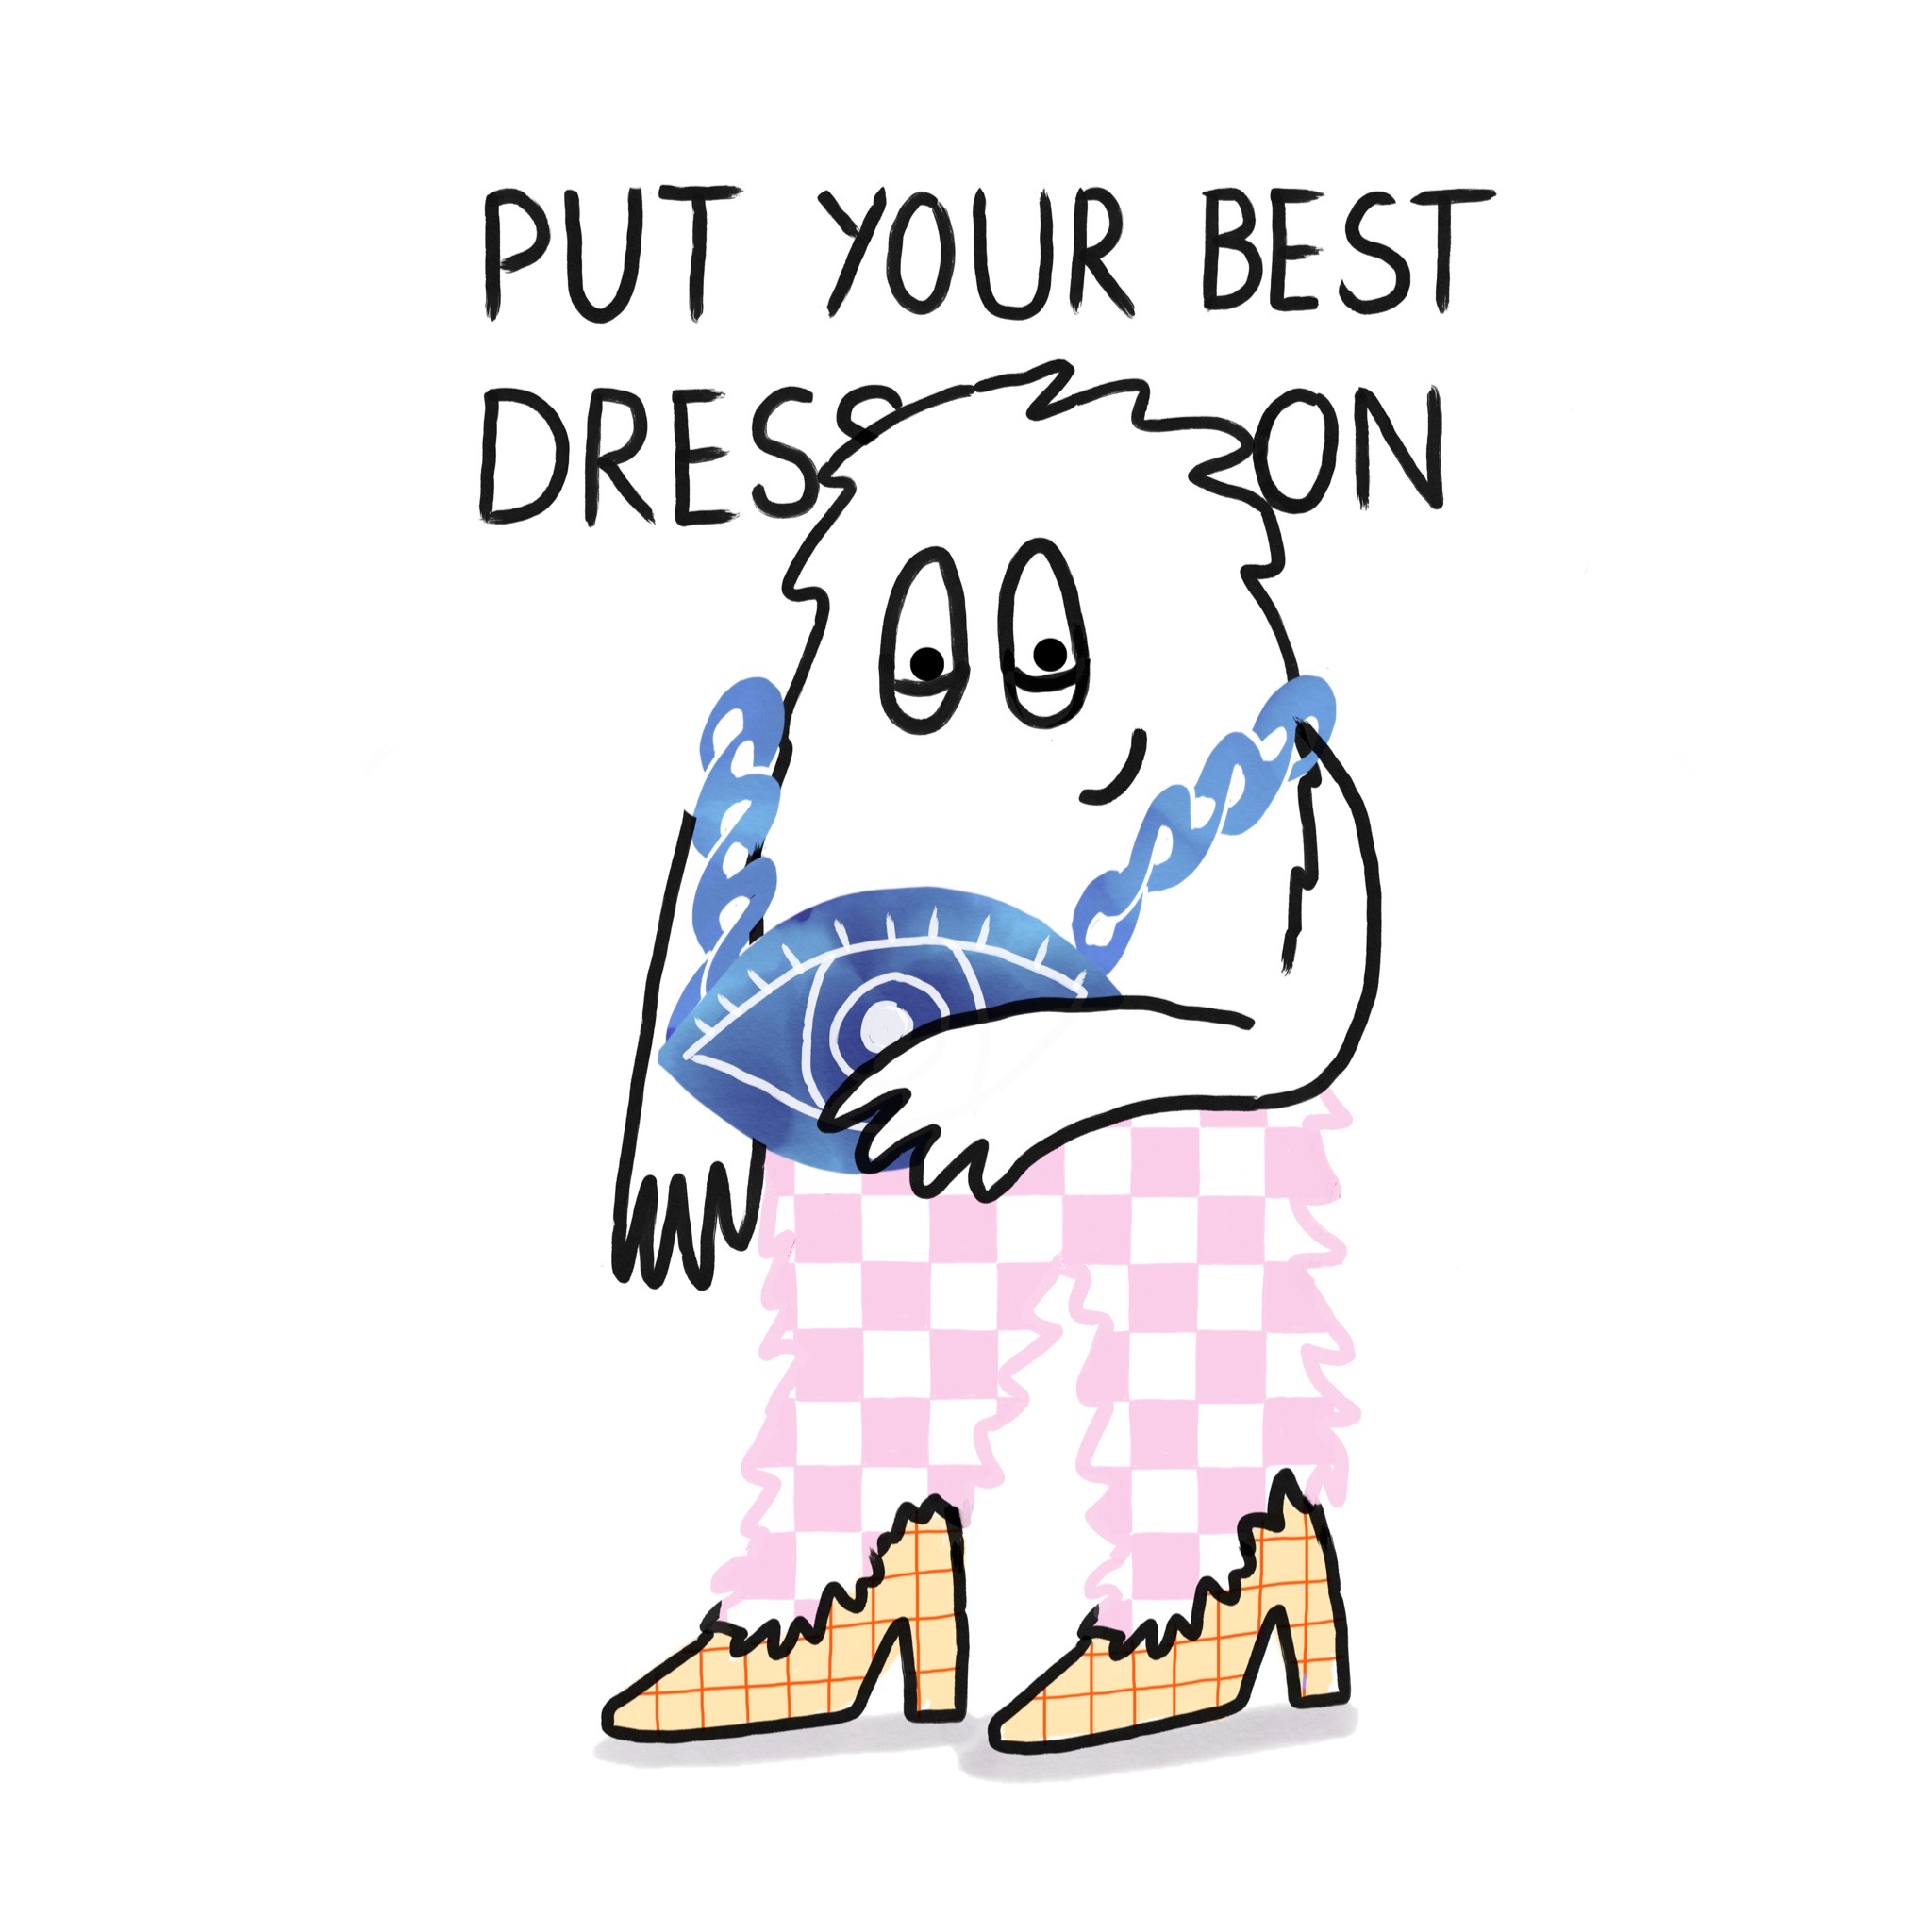 Put your best dress on!